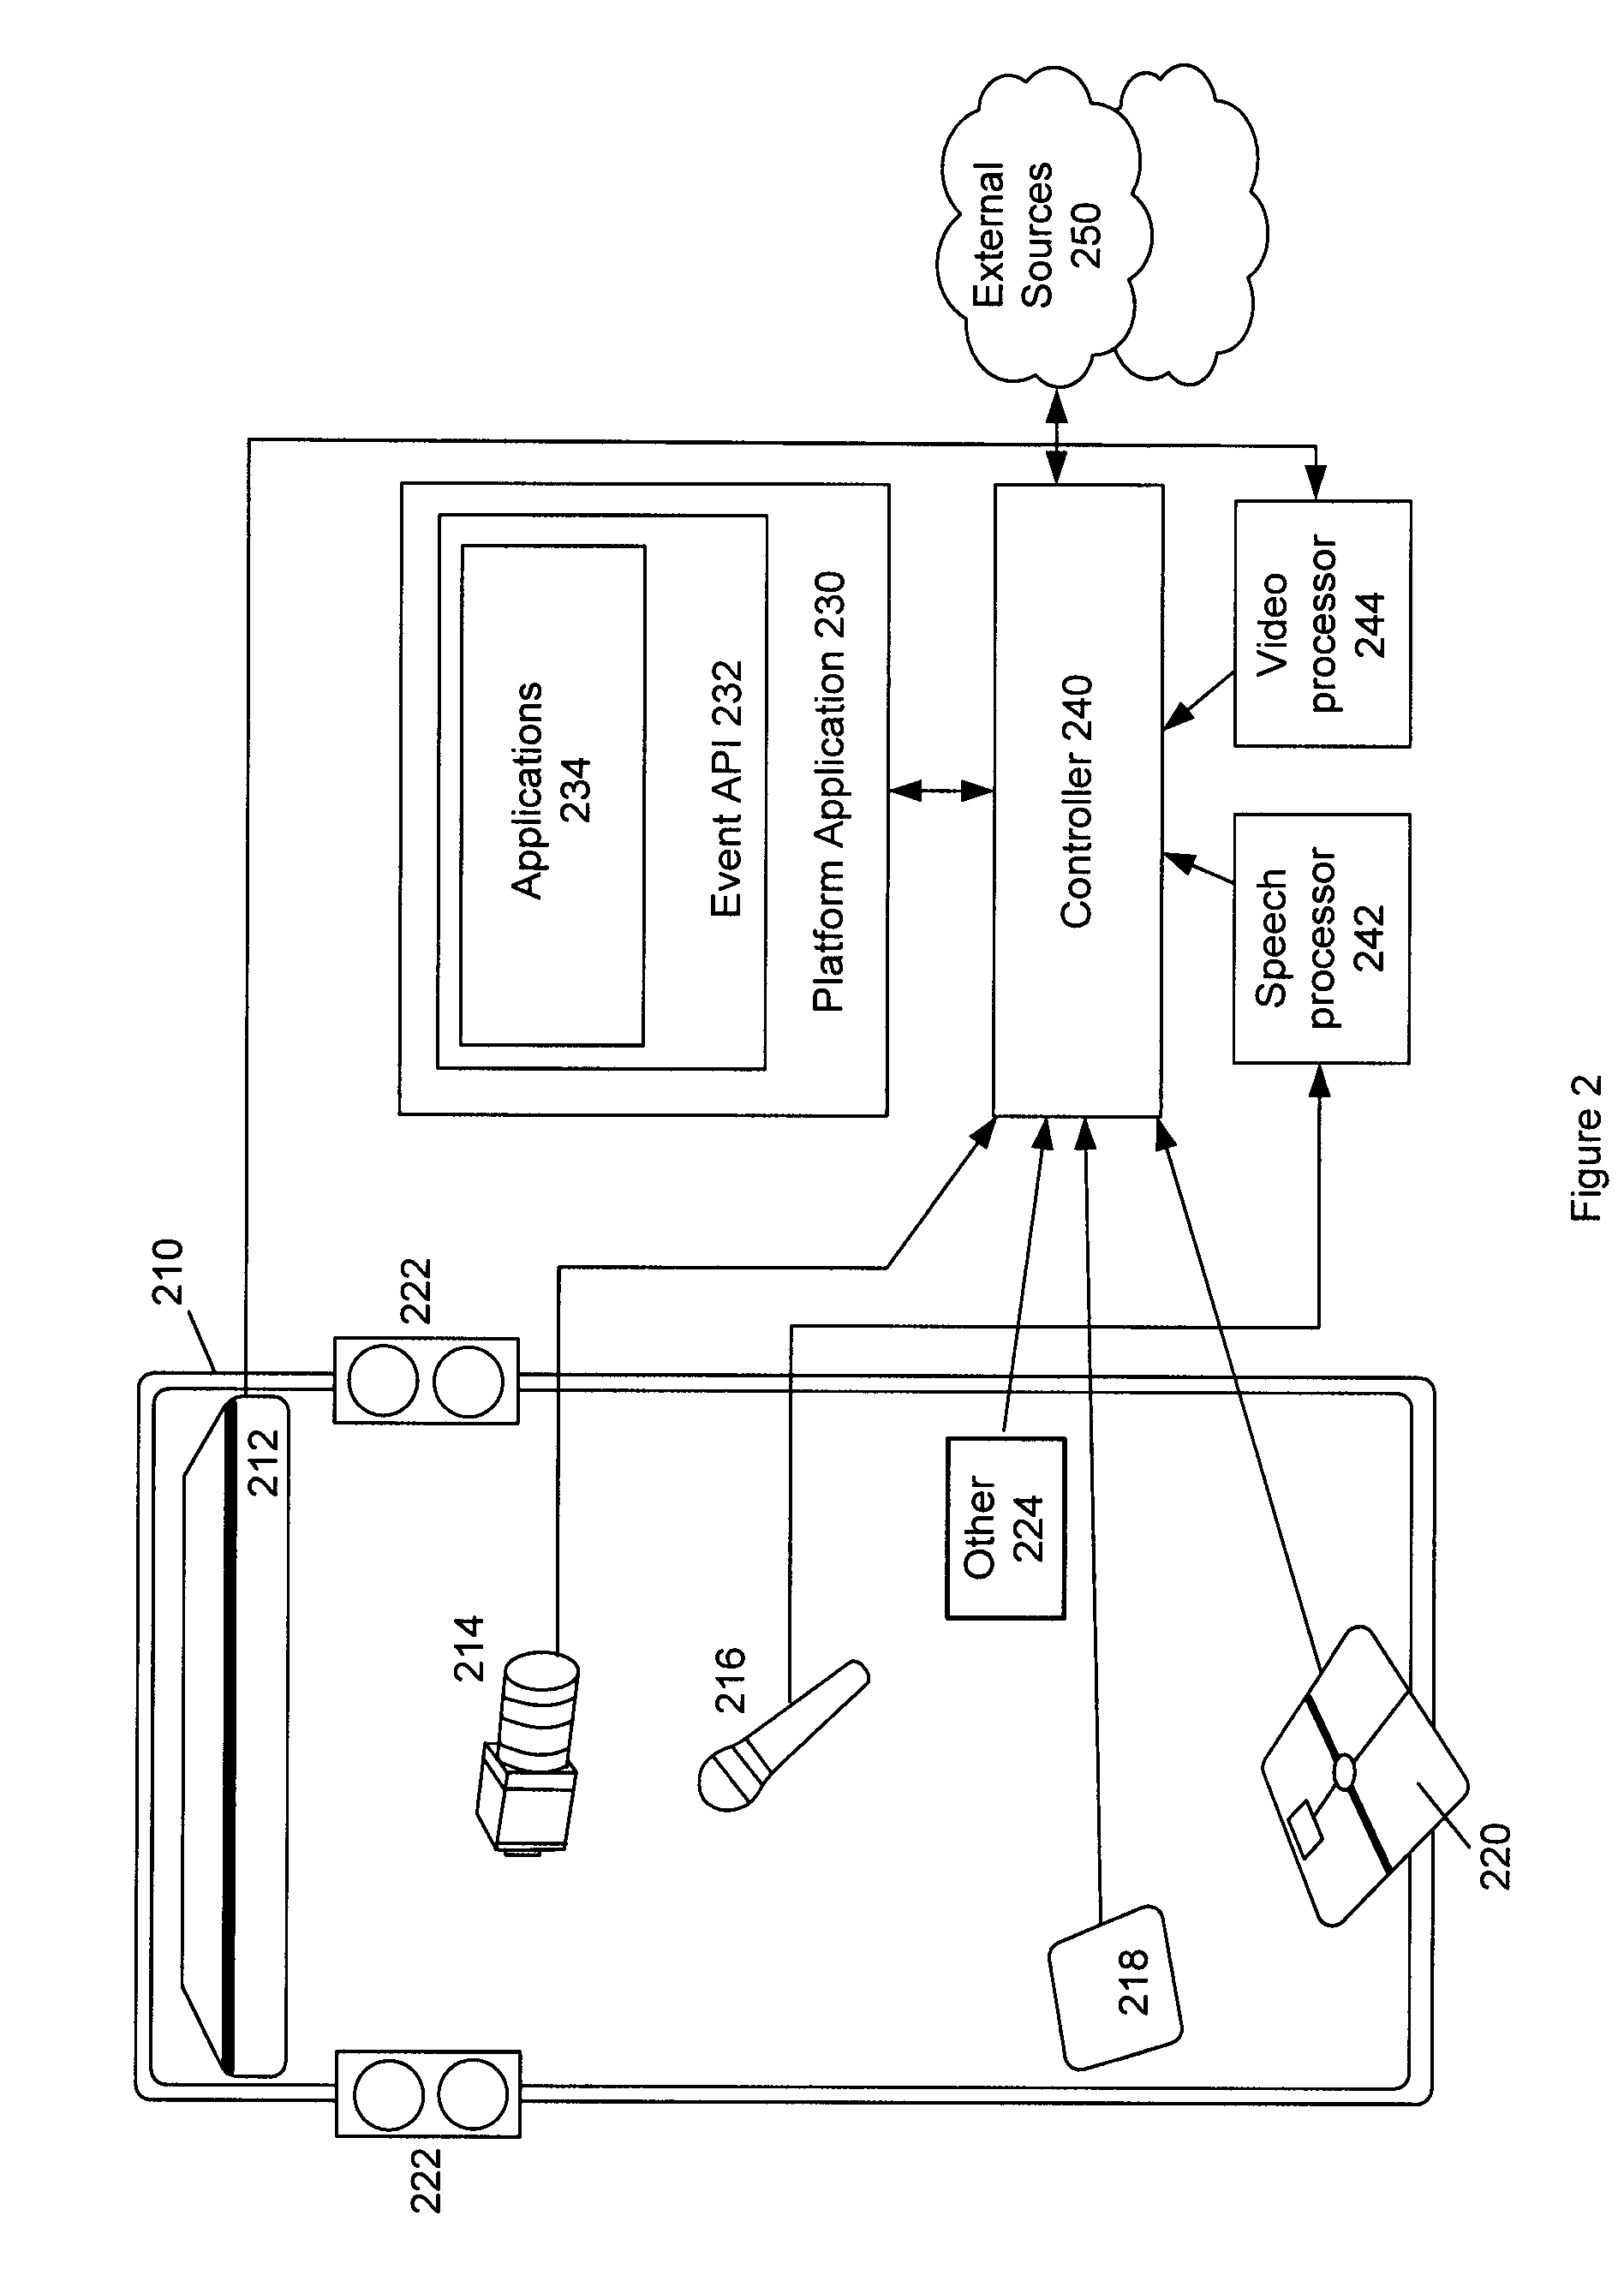 System and method for providing an interactive data-bearing mirror interface